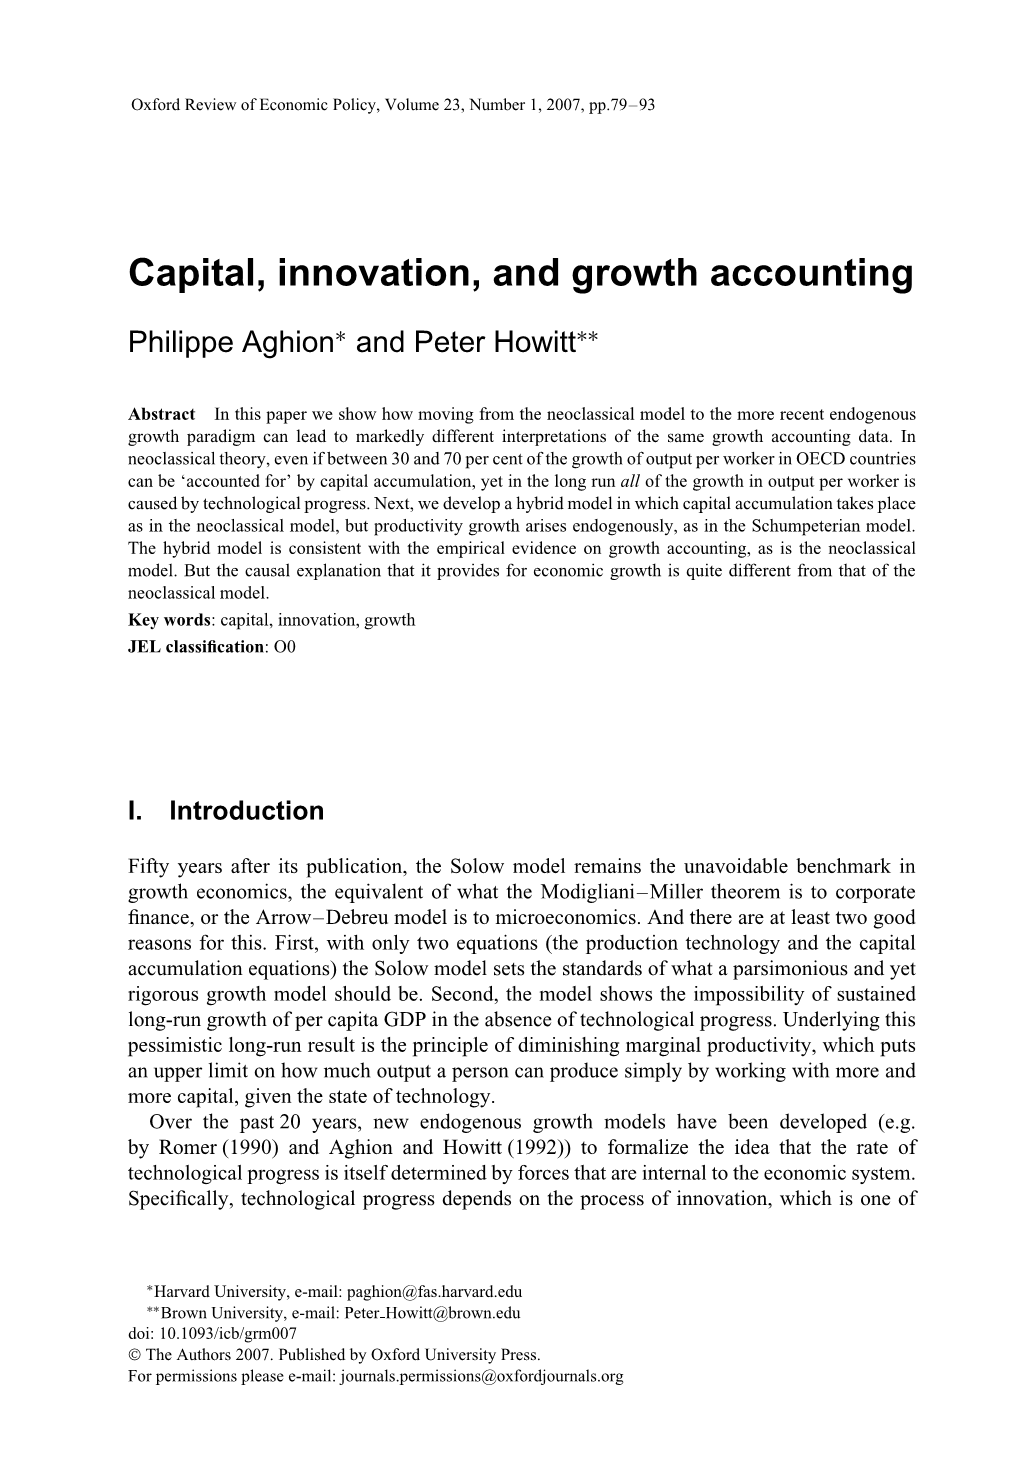 Capital, Innovation, and Growth Accounting